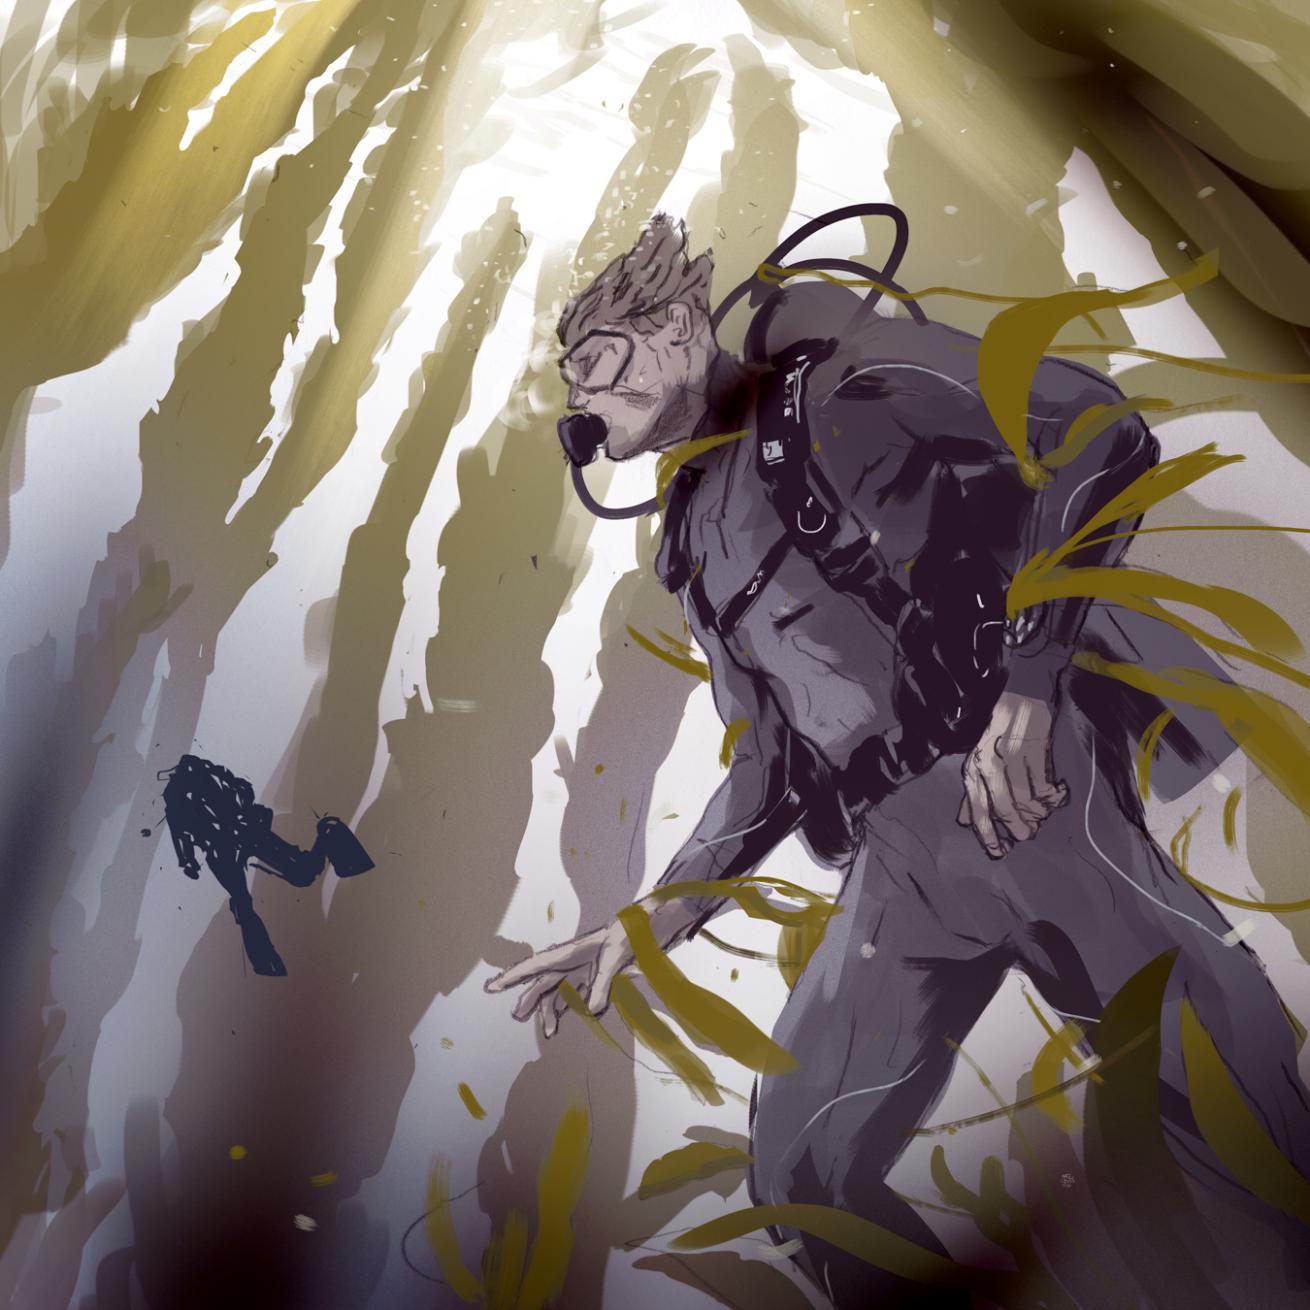 Scuba Diver Caught in Kelp Illustrations Lessons for Life